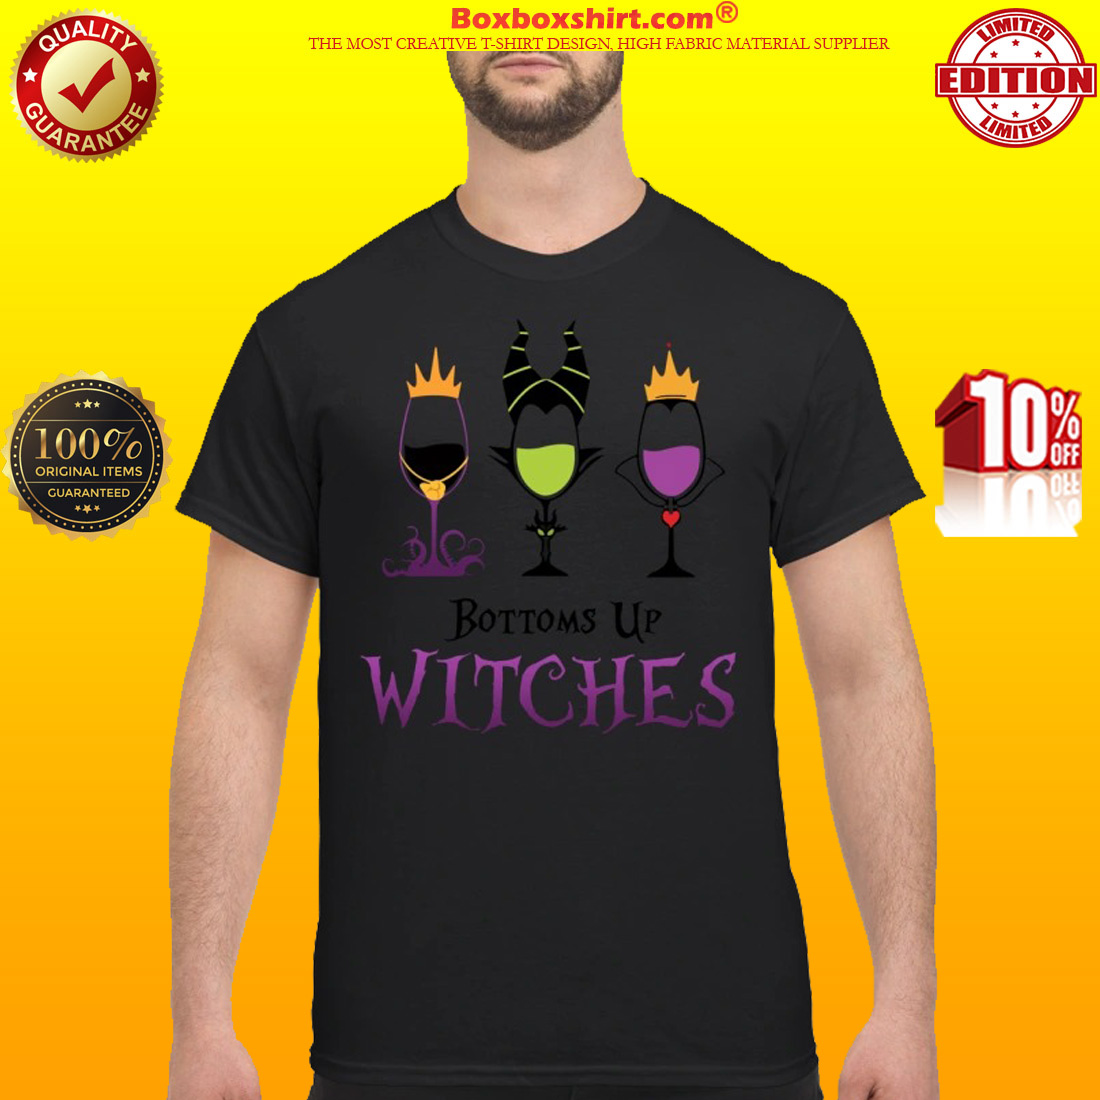 Bottoms up witches Hocus Pocus classic shirt